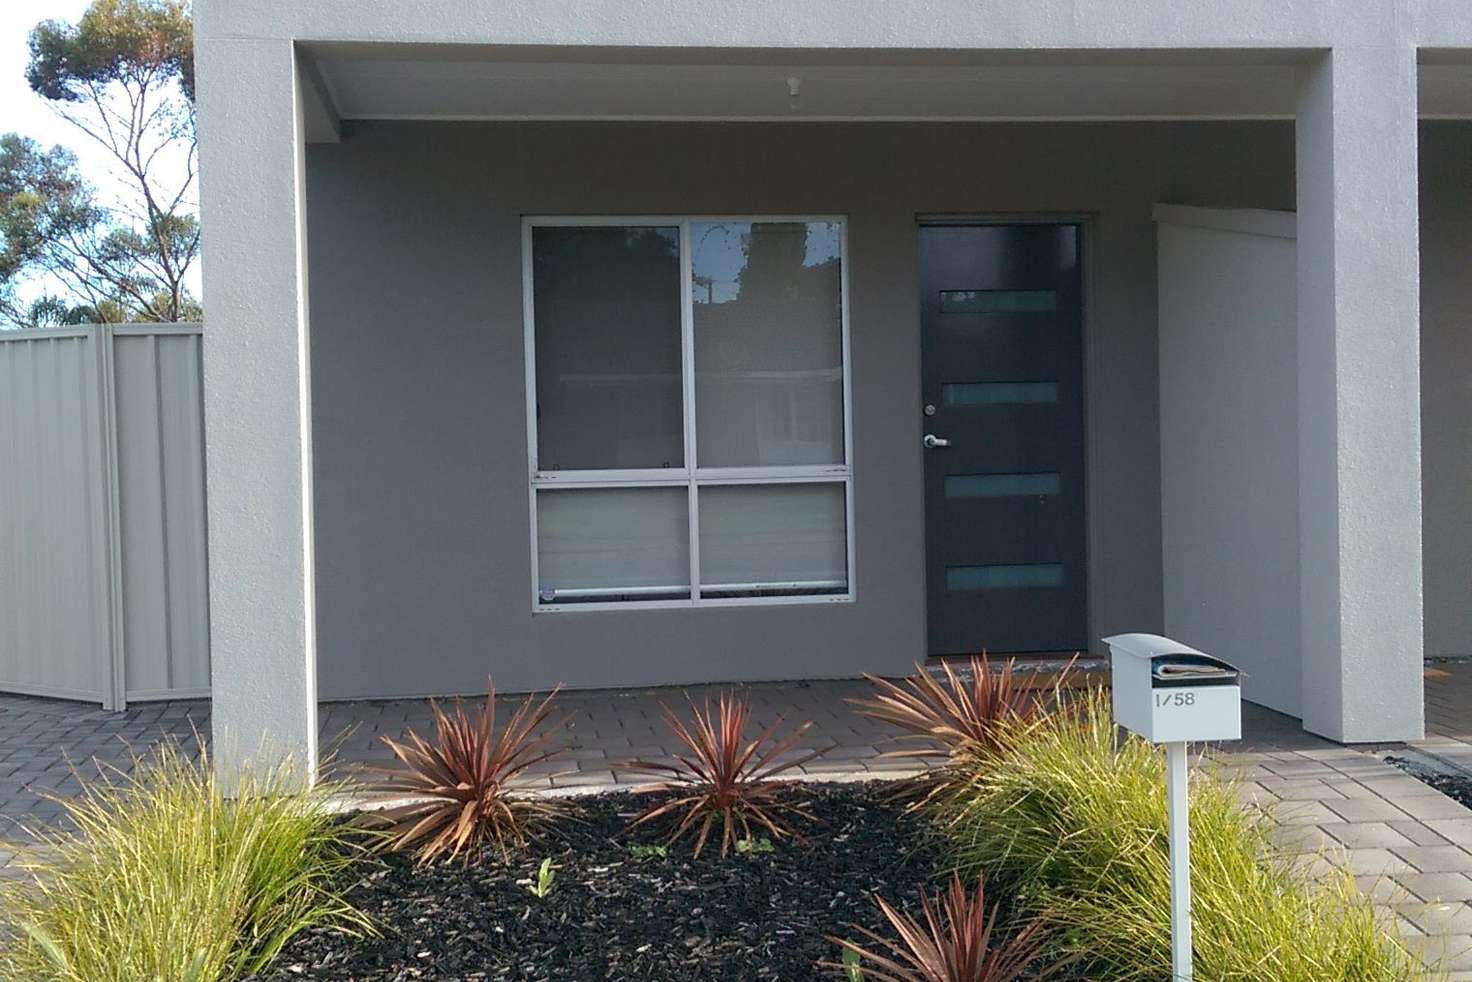 Main view of Homely townhouse listing, 1/58 Conington Crescent, Morphett Vale SA 5162